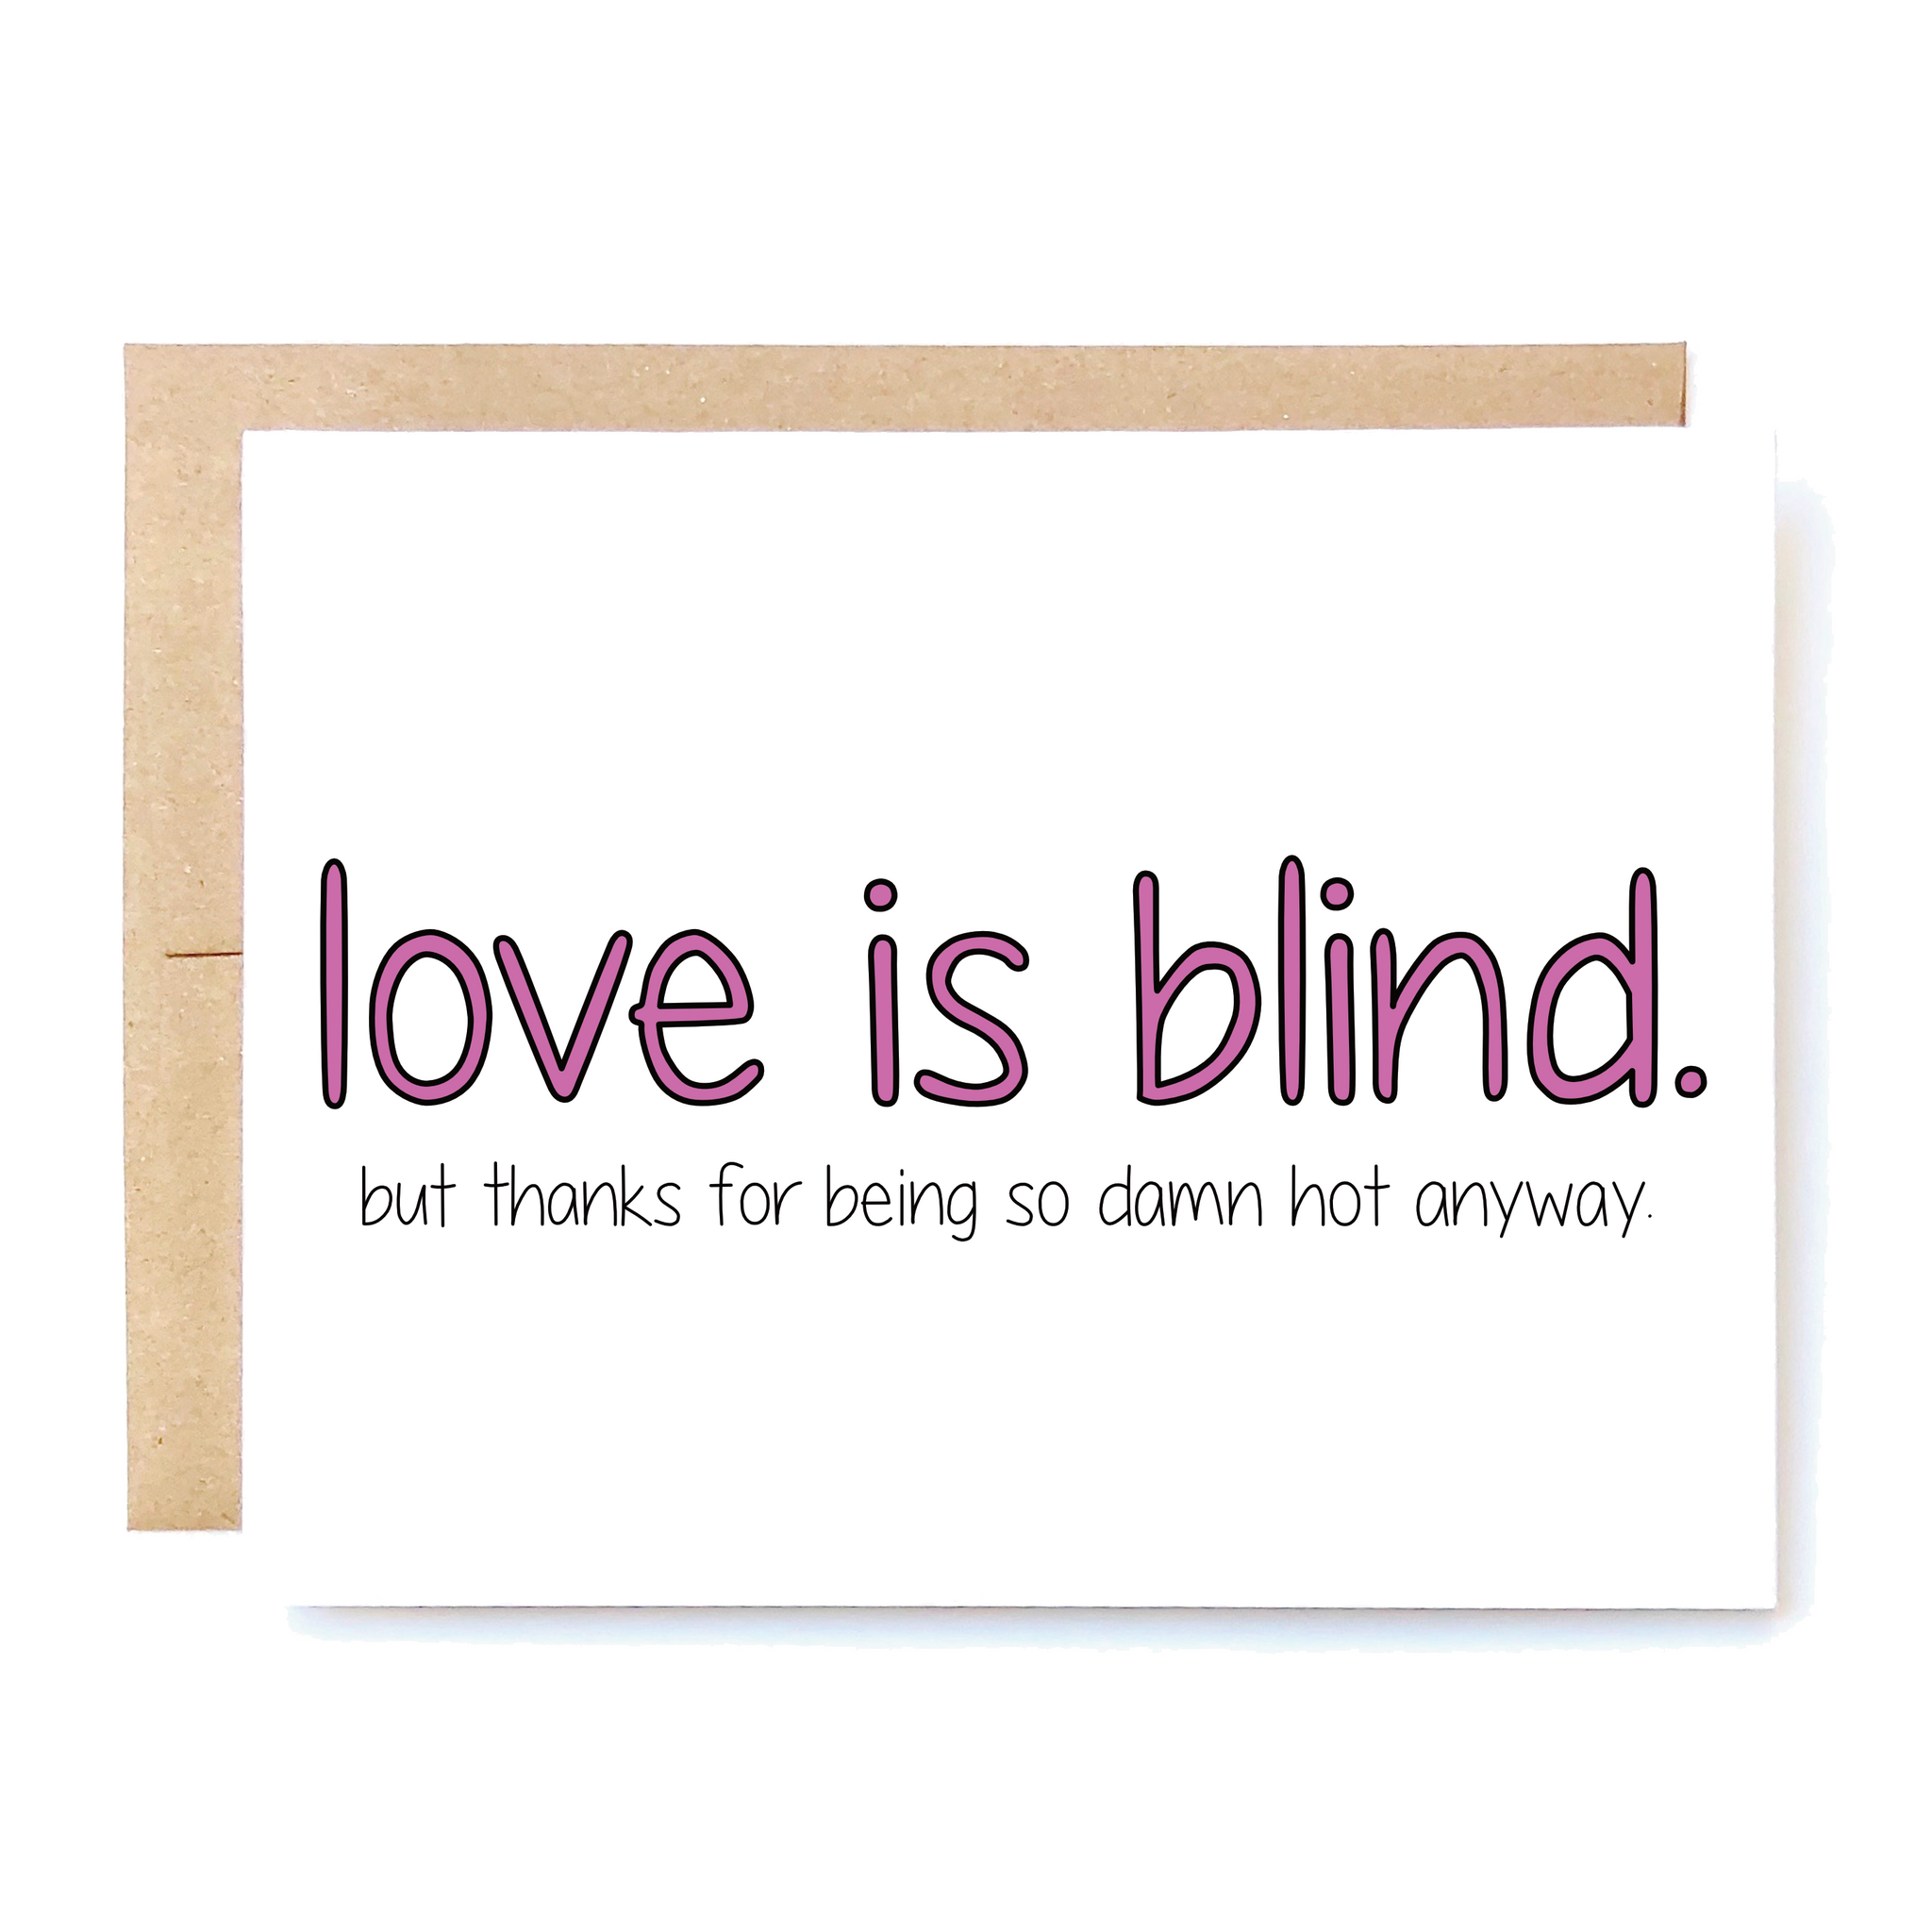 Card Front: Love is blind, but thanks for being so damn hot anyway.